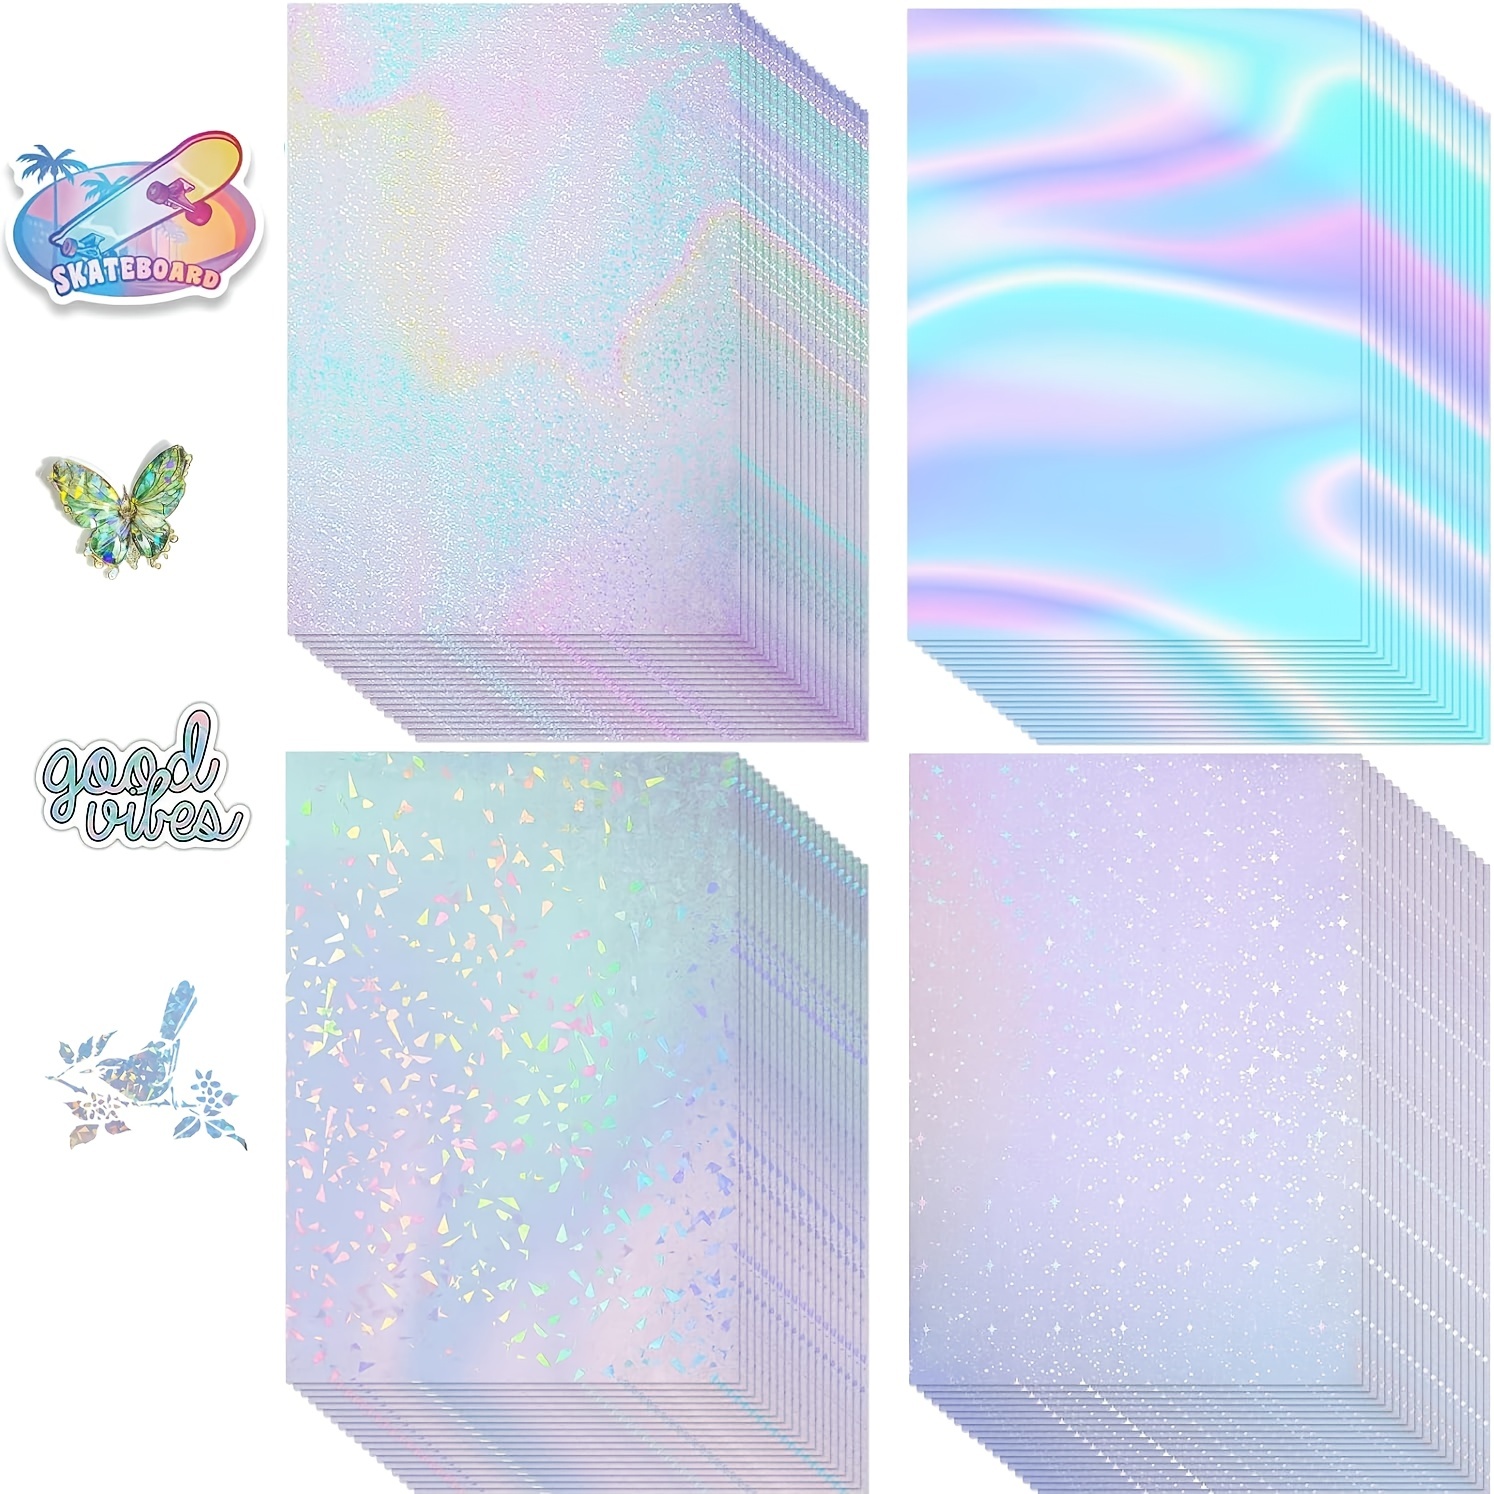  Koala Holographic Laminate Sheets A4 Clear Holographic Sticker  Paper 25 Sheets Self Adhesive Transparent Waterproof Holographic Overlay  for Sticker Paper - Gem, Dot, Rainbow, Star Patterns : Arts, Crafts & Sewing